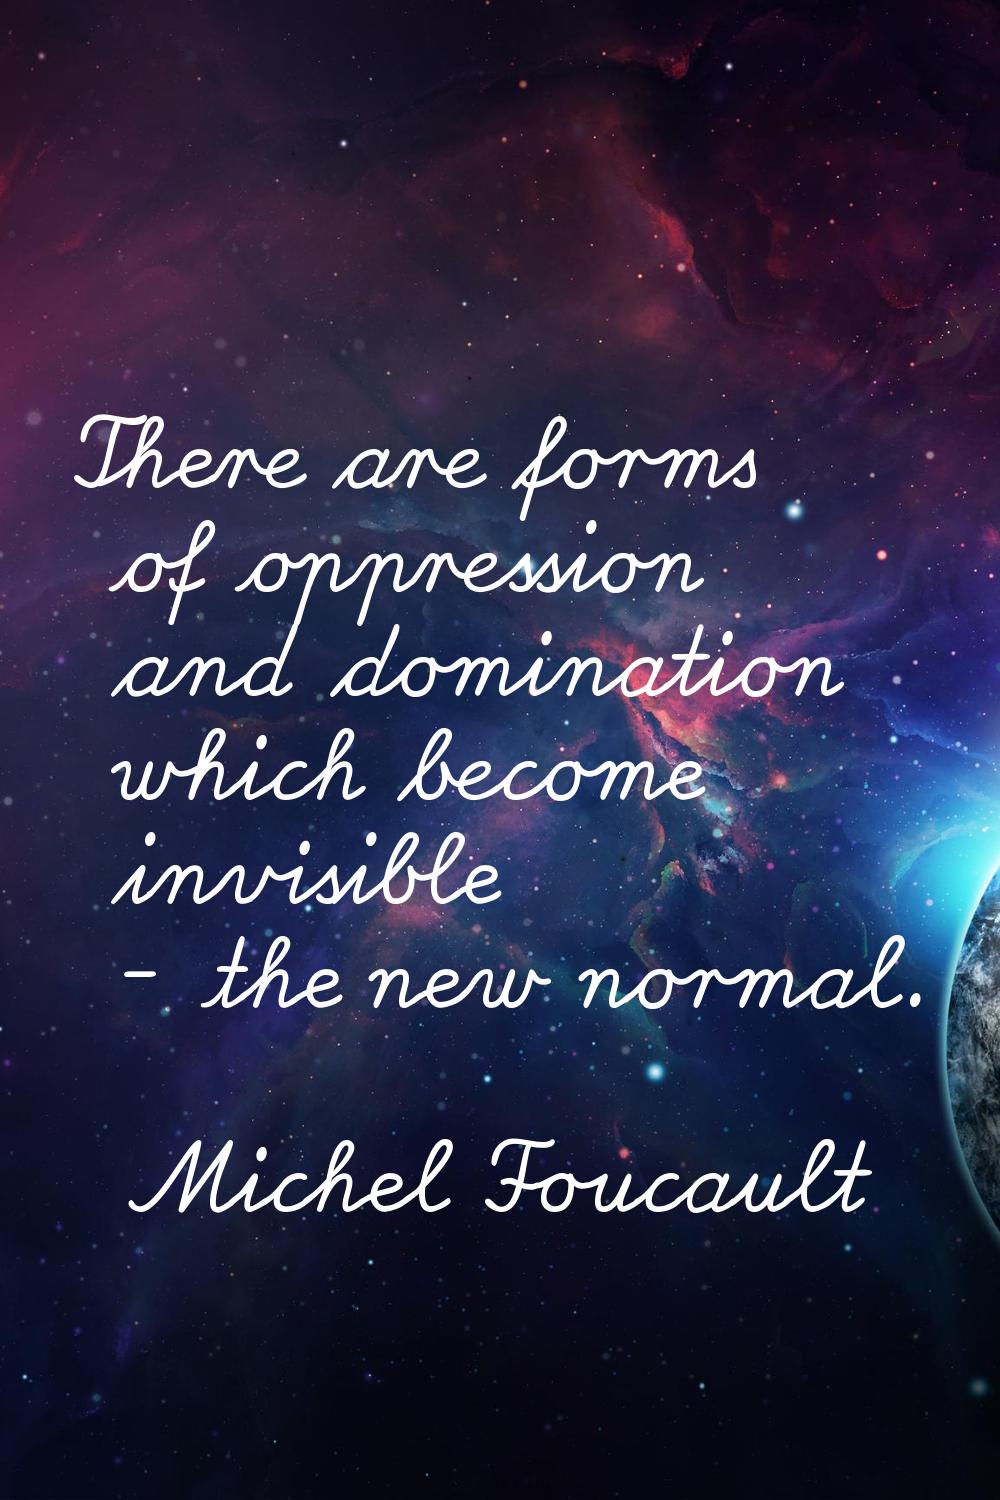 There are forms of oppression and domination which become invisible - the new normal.